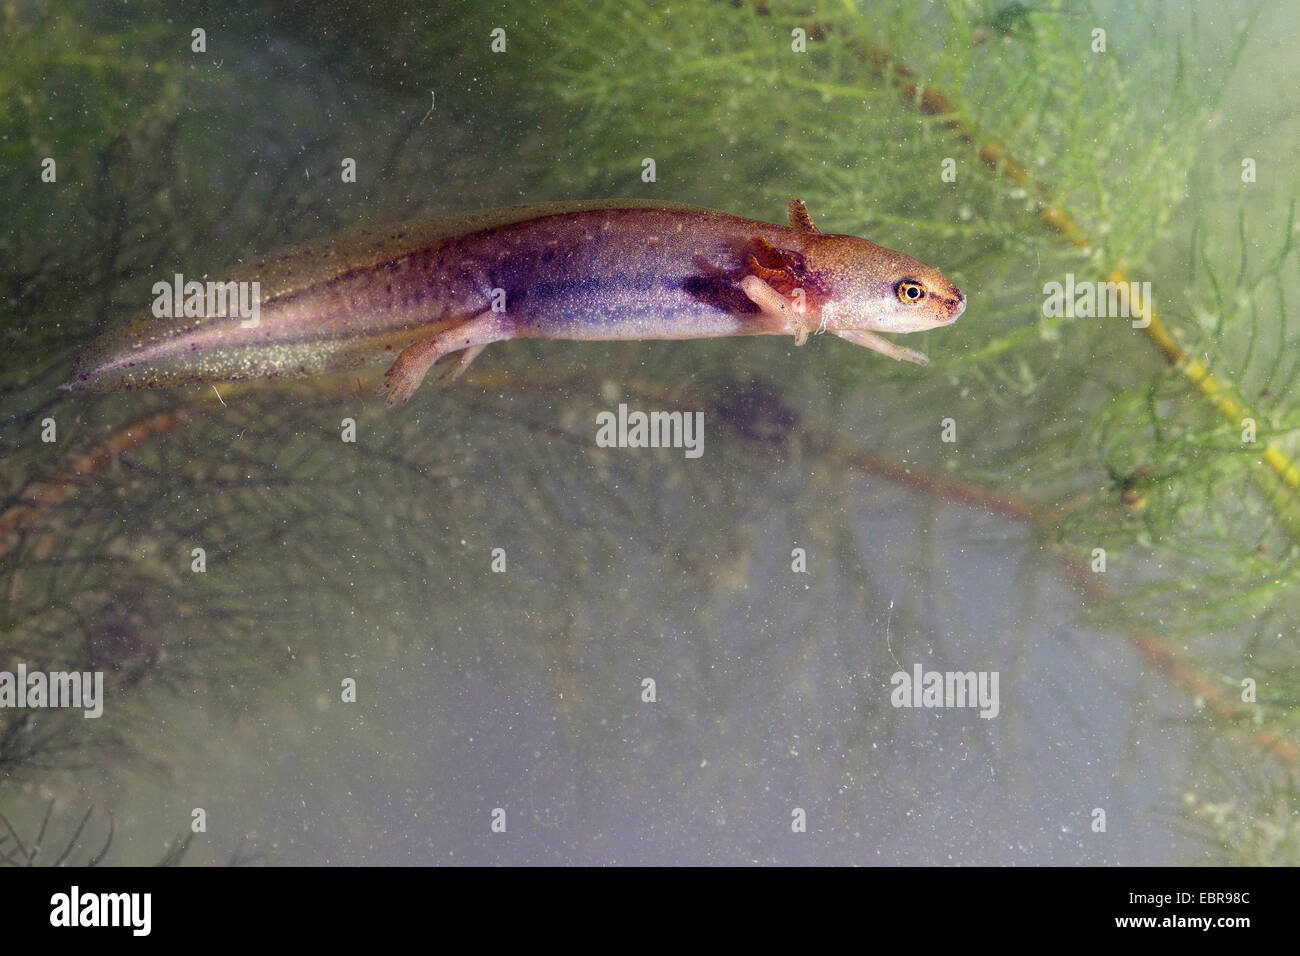 Palmate newt (Triturus helveticus, Lissotriton helveticus), tadpole with outer gills, Germany Stock Photo